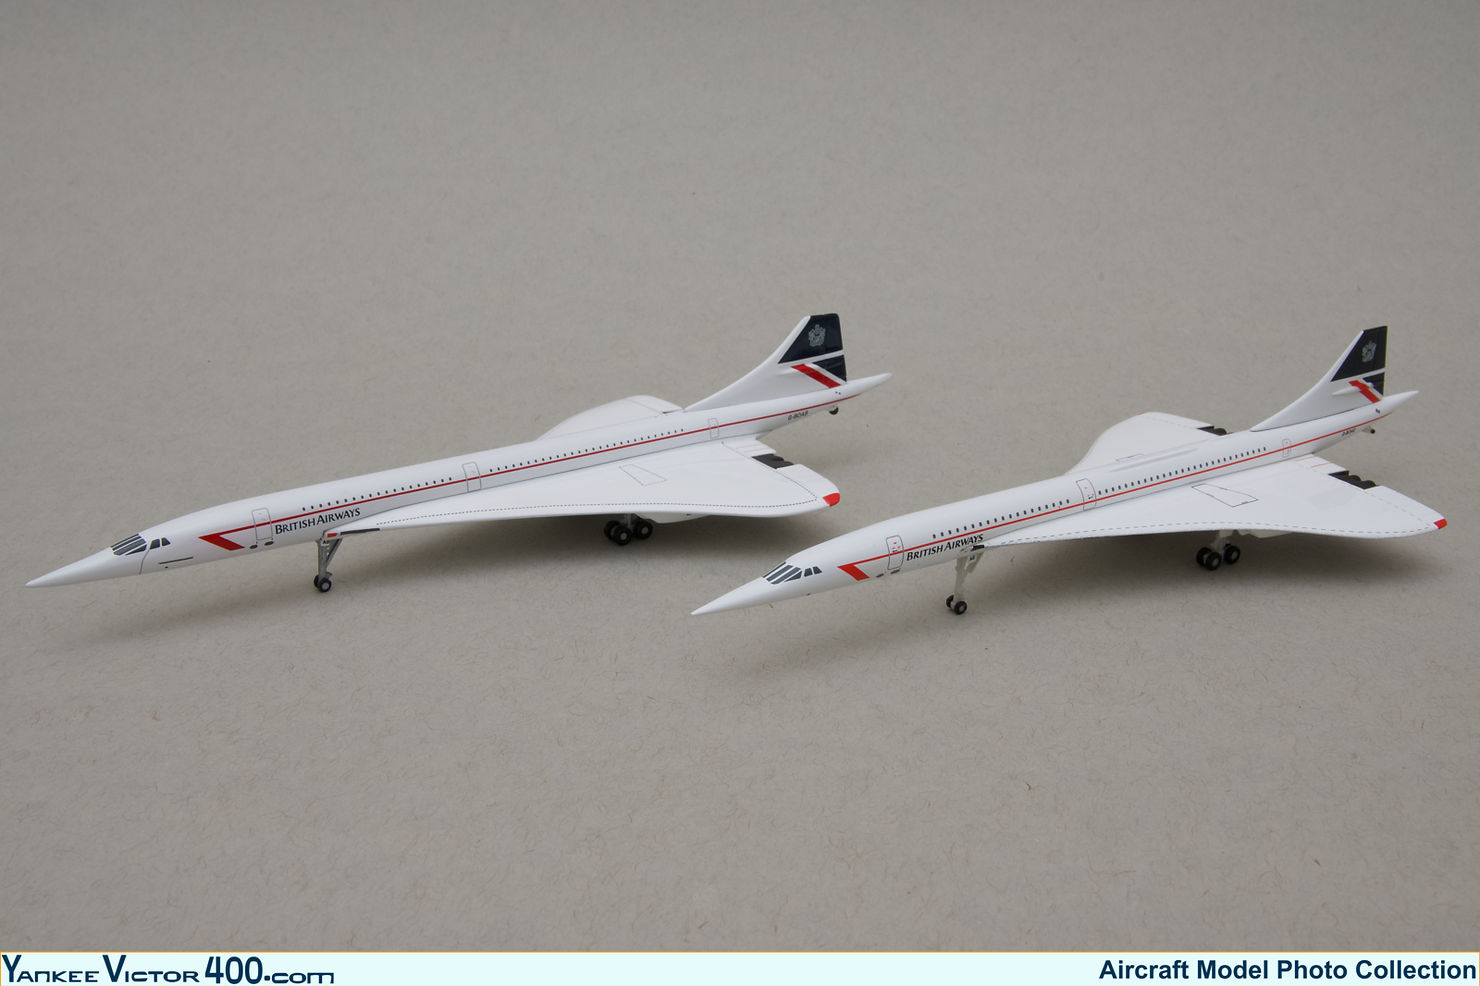 Two 1:400 scale models of British Airways Concorde Aircraft in the Landor livery